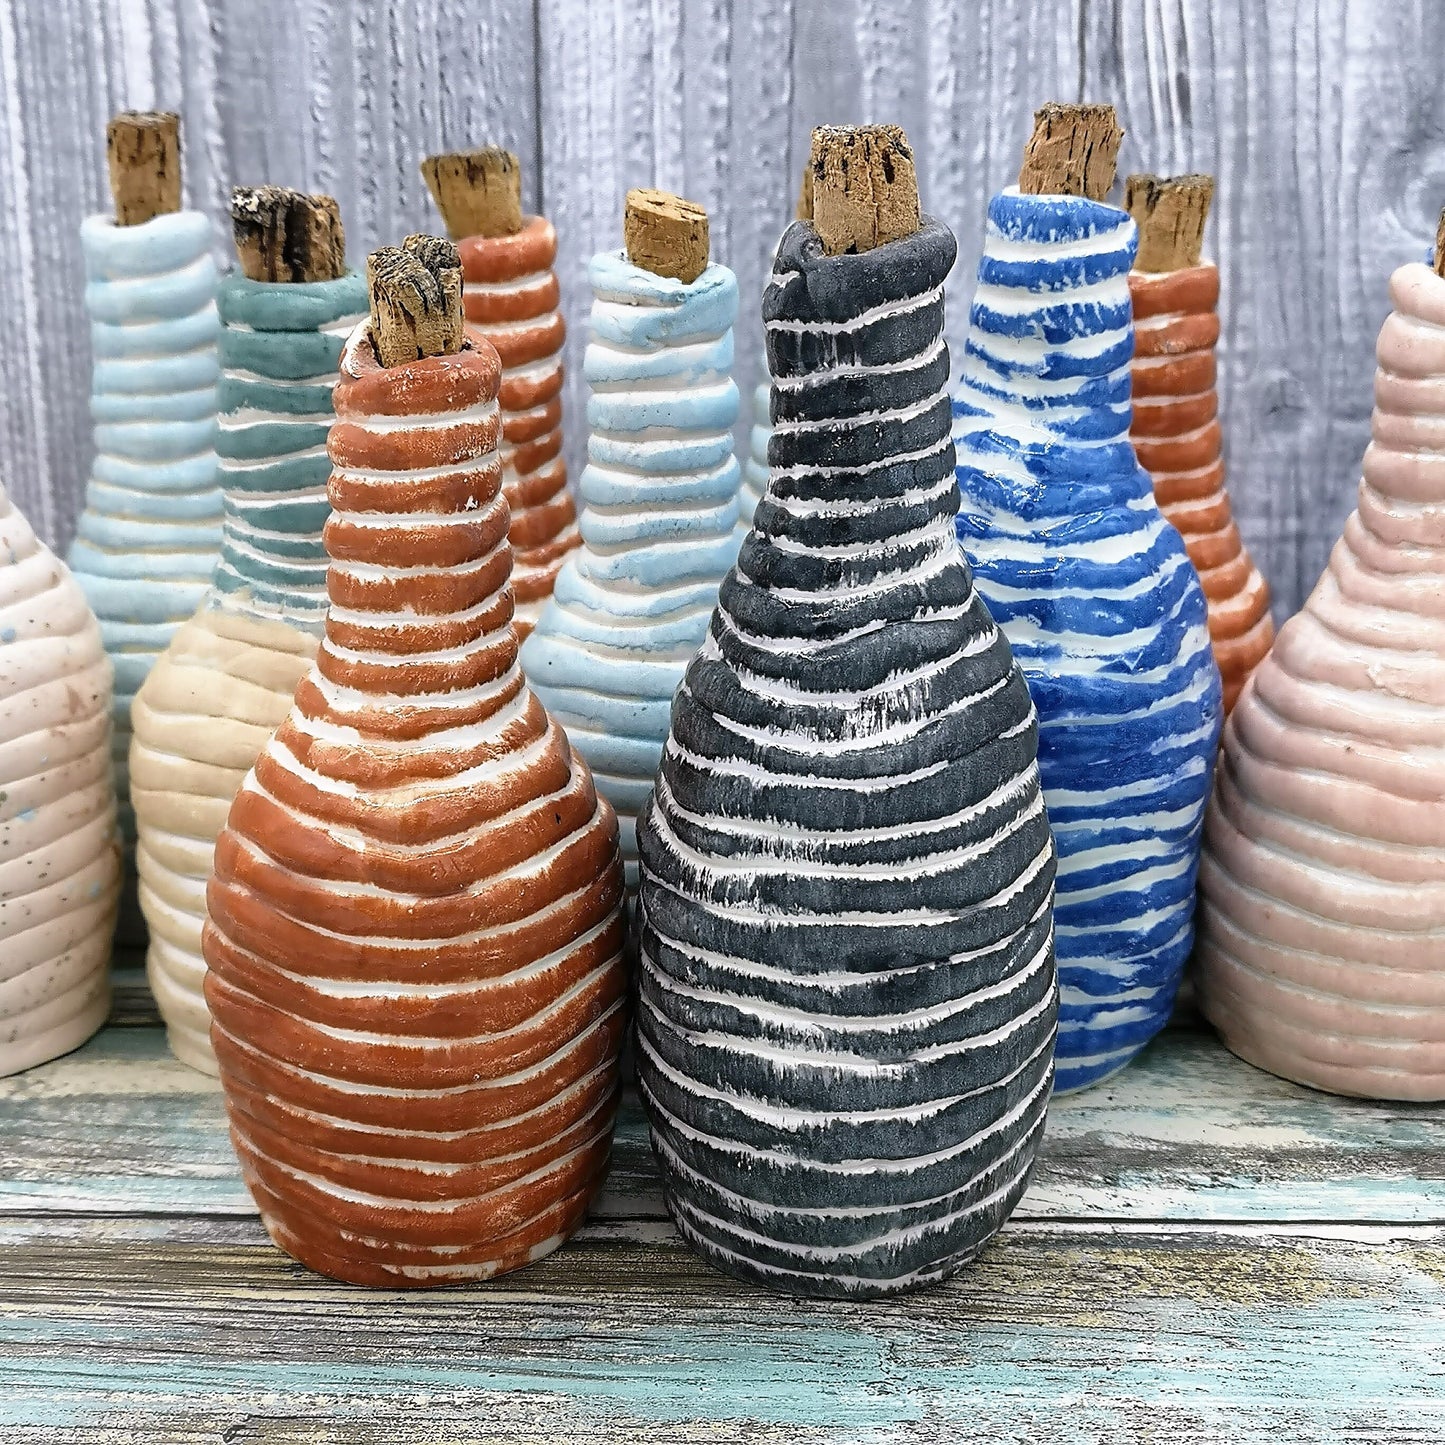 SMALL CERAMIC BOTTLE, Decorative Bottles, Charming Ceramic Bottle With A Natural Cork Stopper, Drinking Bottle 9th Anniversary Gift - Ceramica Ana Rafael